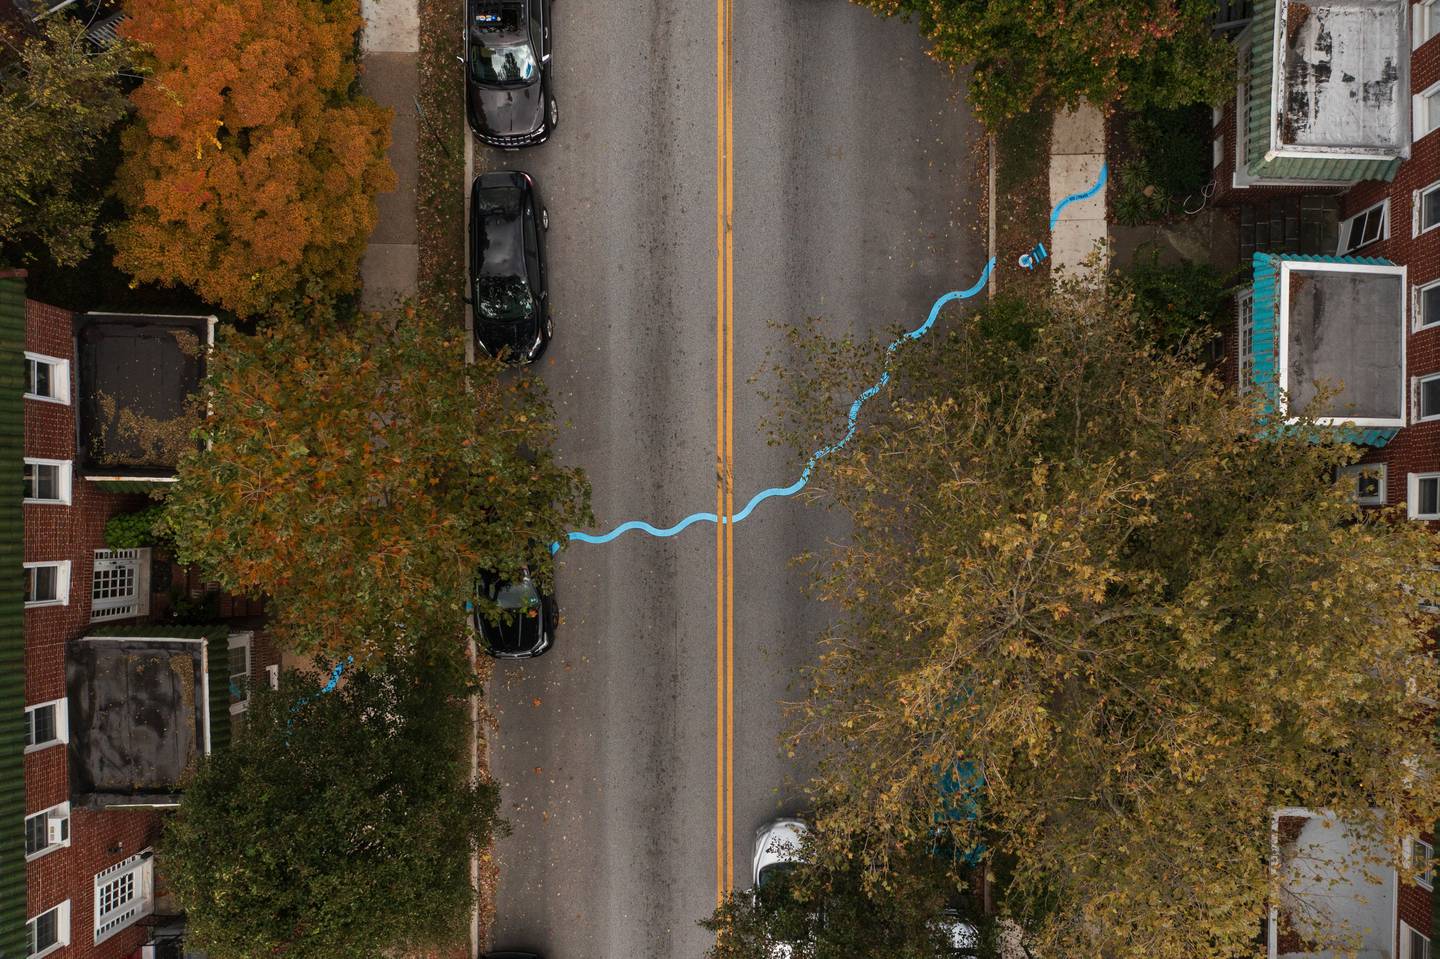 A bird's eye view of a city street, lined with trees and cars, with a blue thermoplastic line squiggling across the road as part of an art installation.